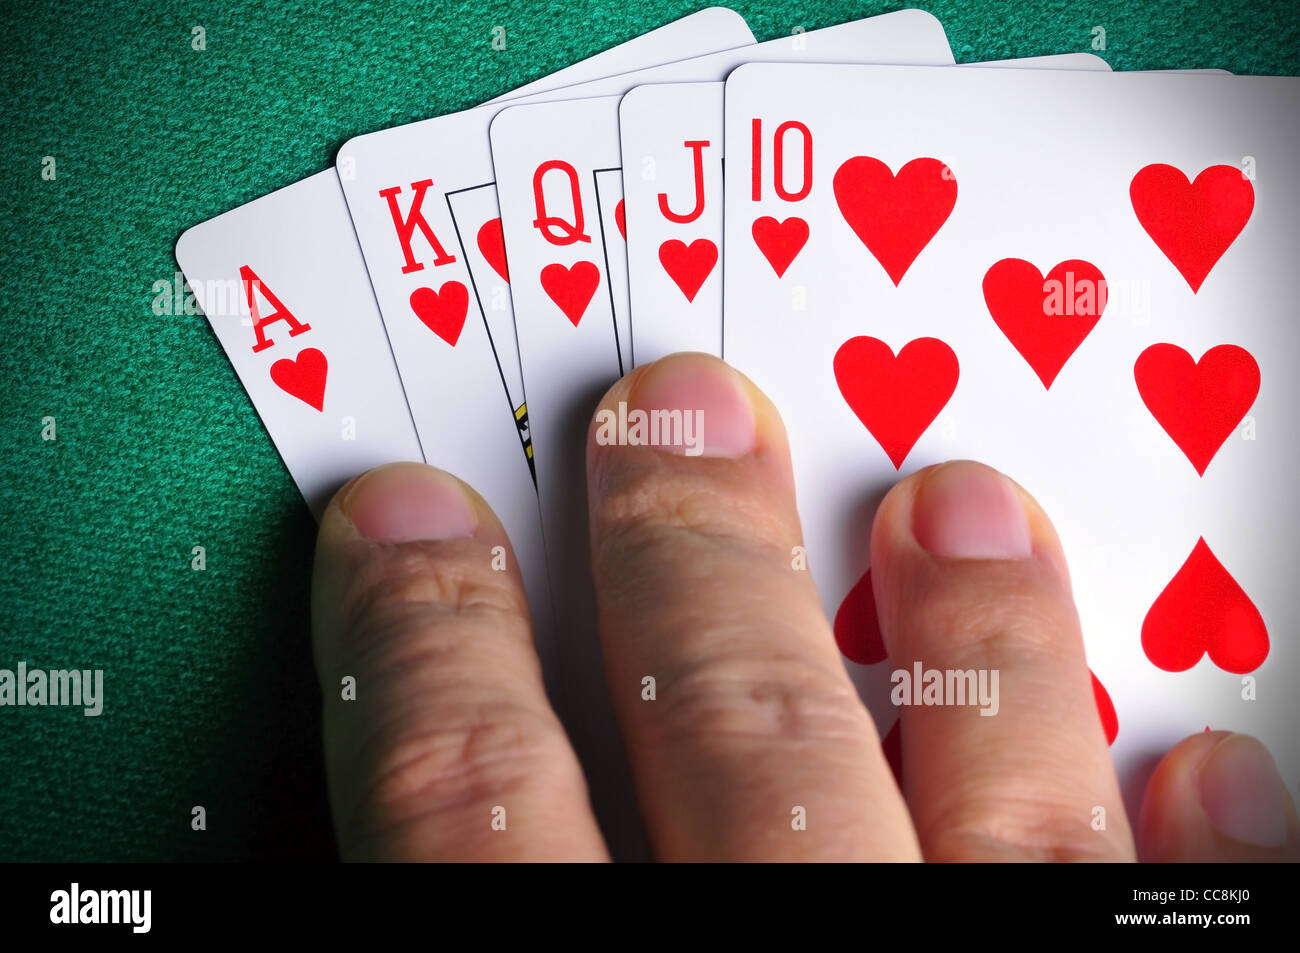 Hand holding a Royal Flush poker card sequence Stock Photo